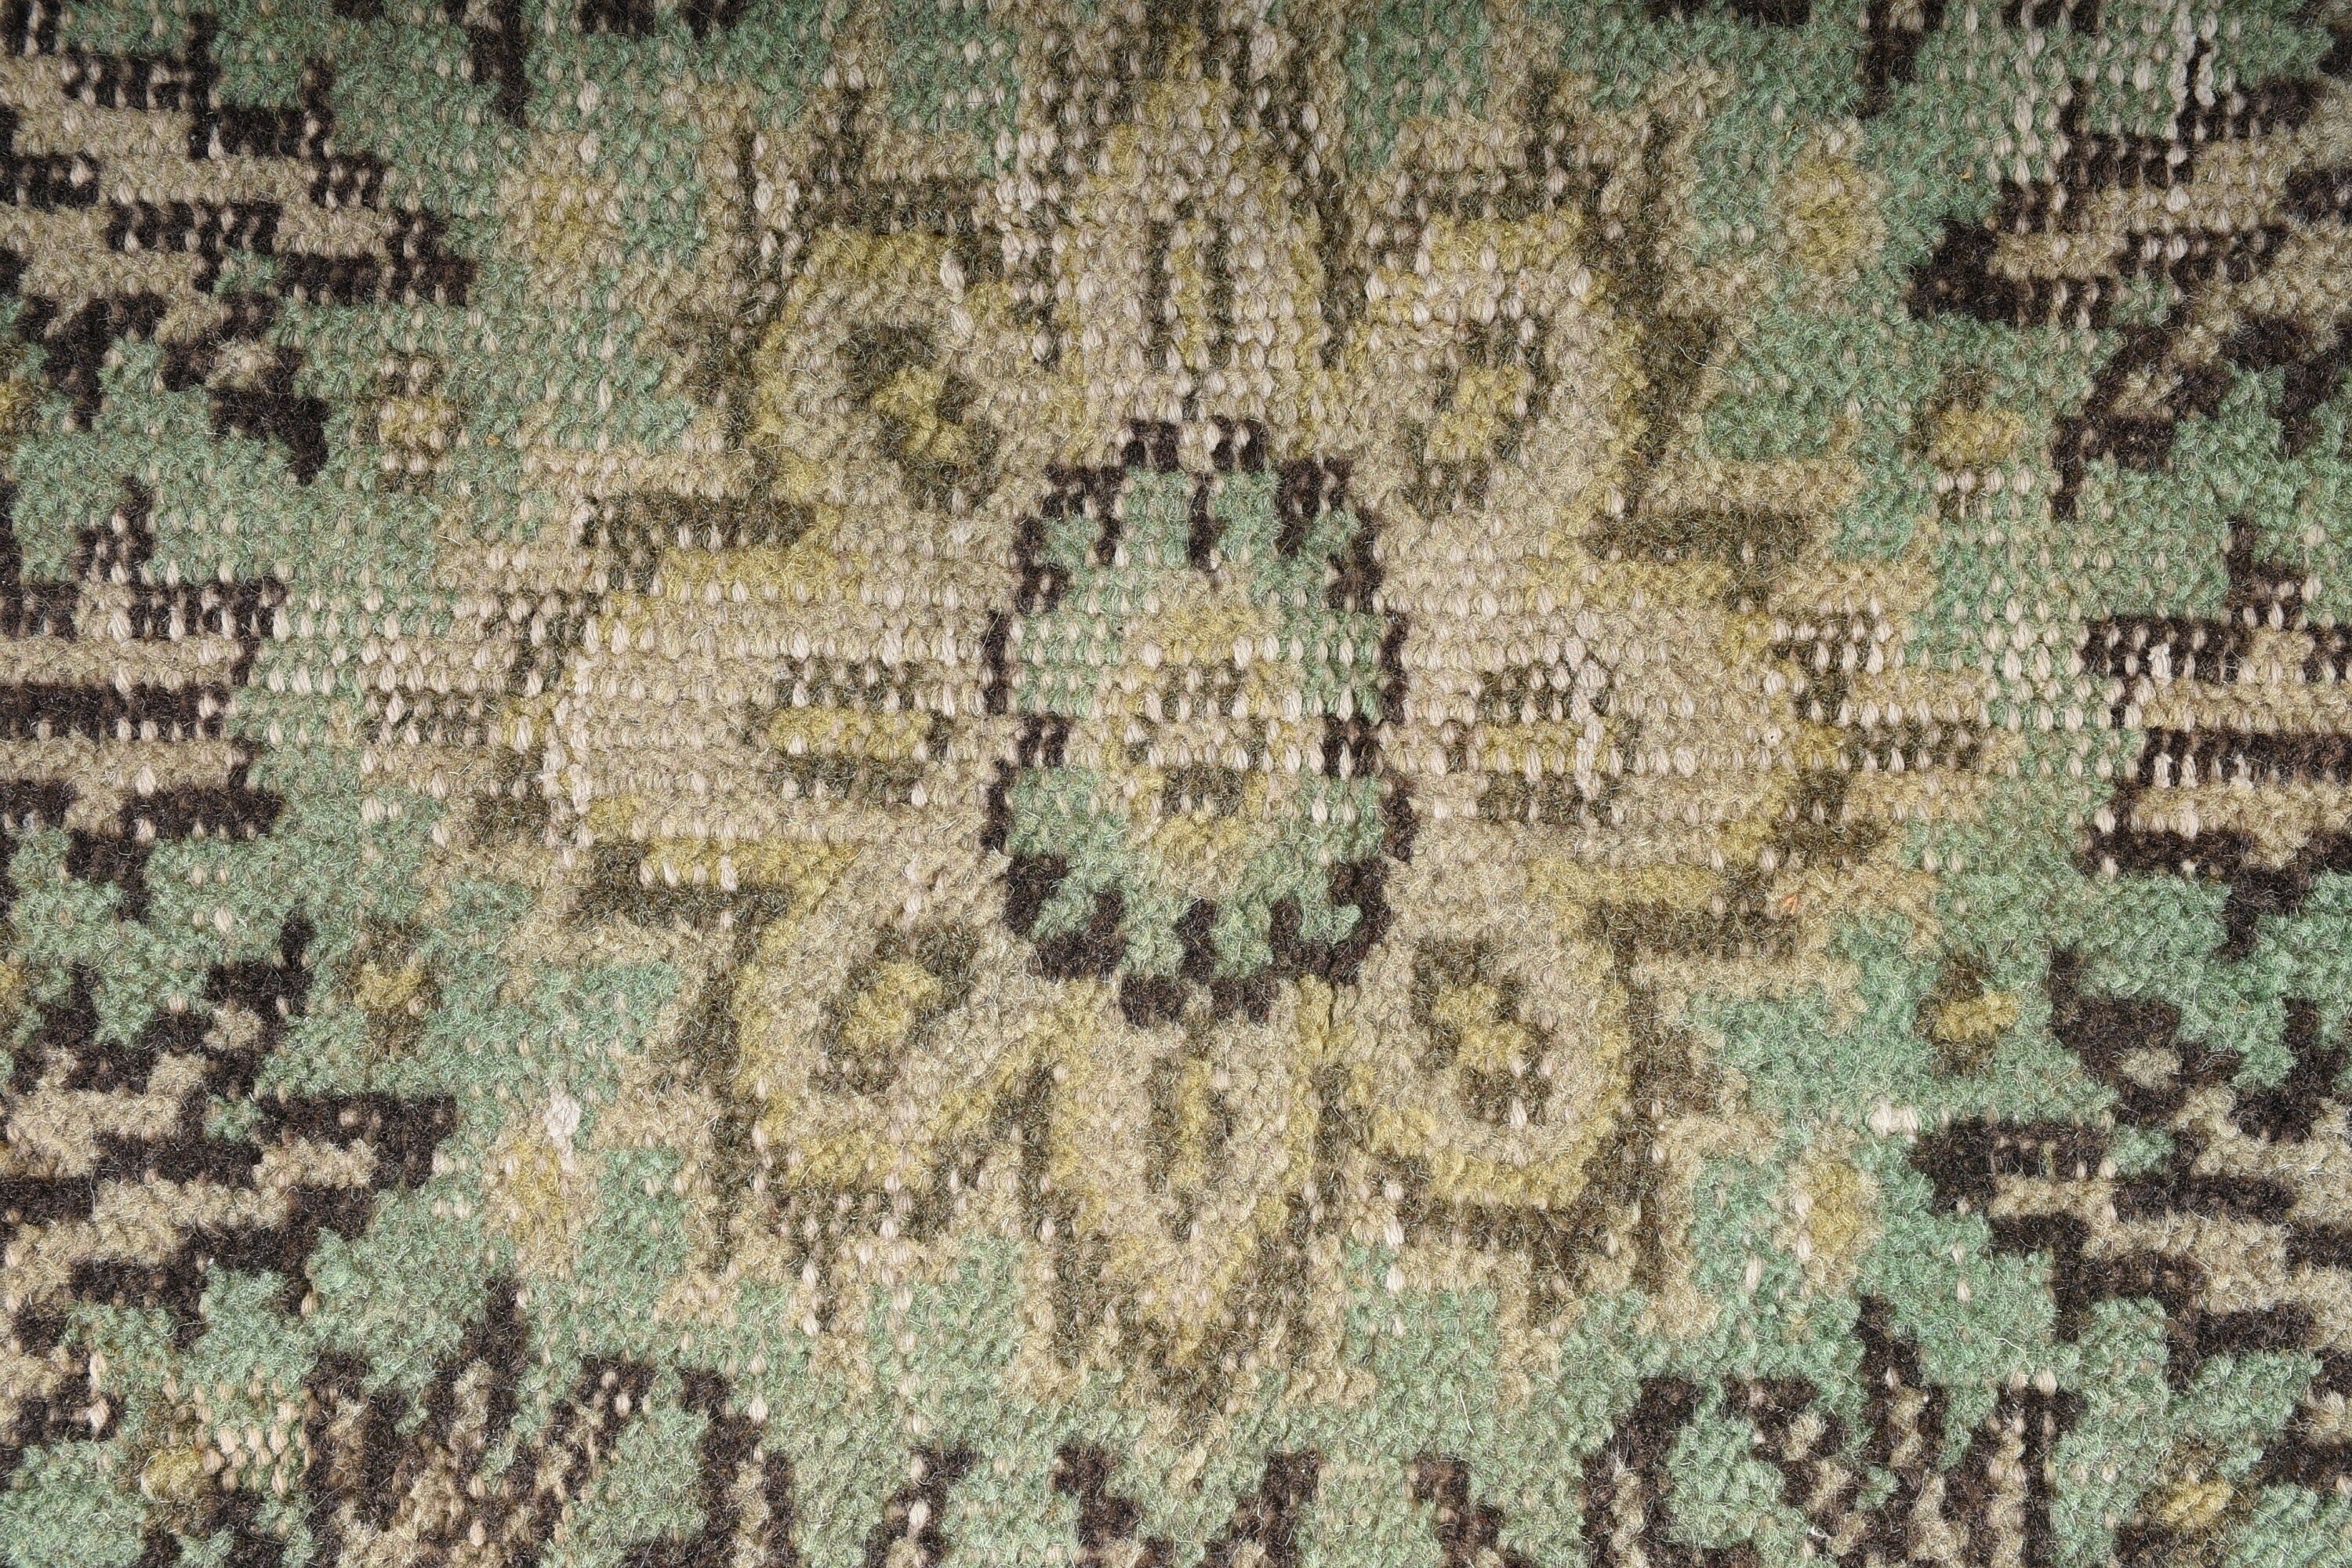 Entry Rug, Turkish Rug, Vintage Rug, Kitchen Rug, Rugs for Nursery, 3.5x6.2 ft Accent Rugs, Floor Rug, Green Antique Rugs